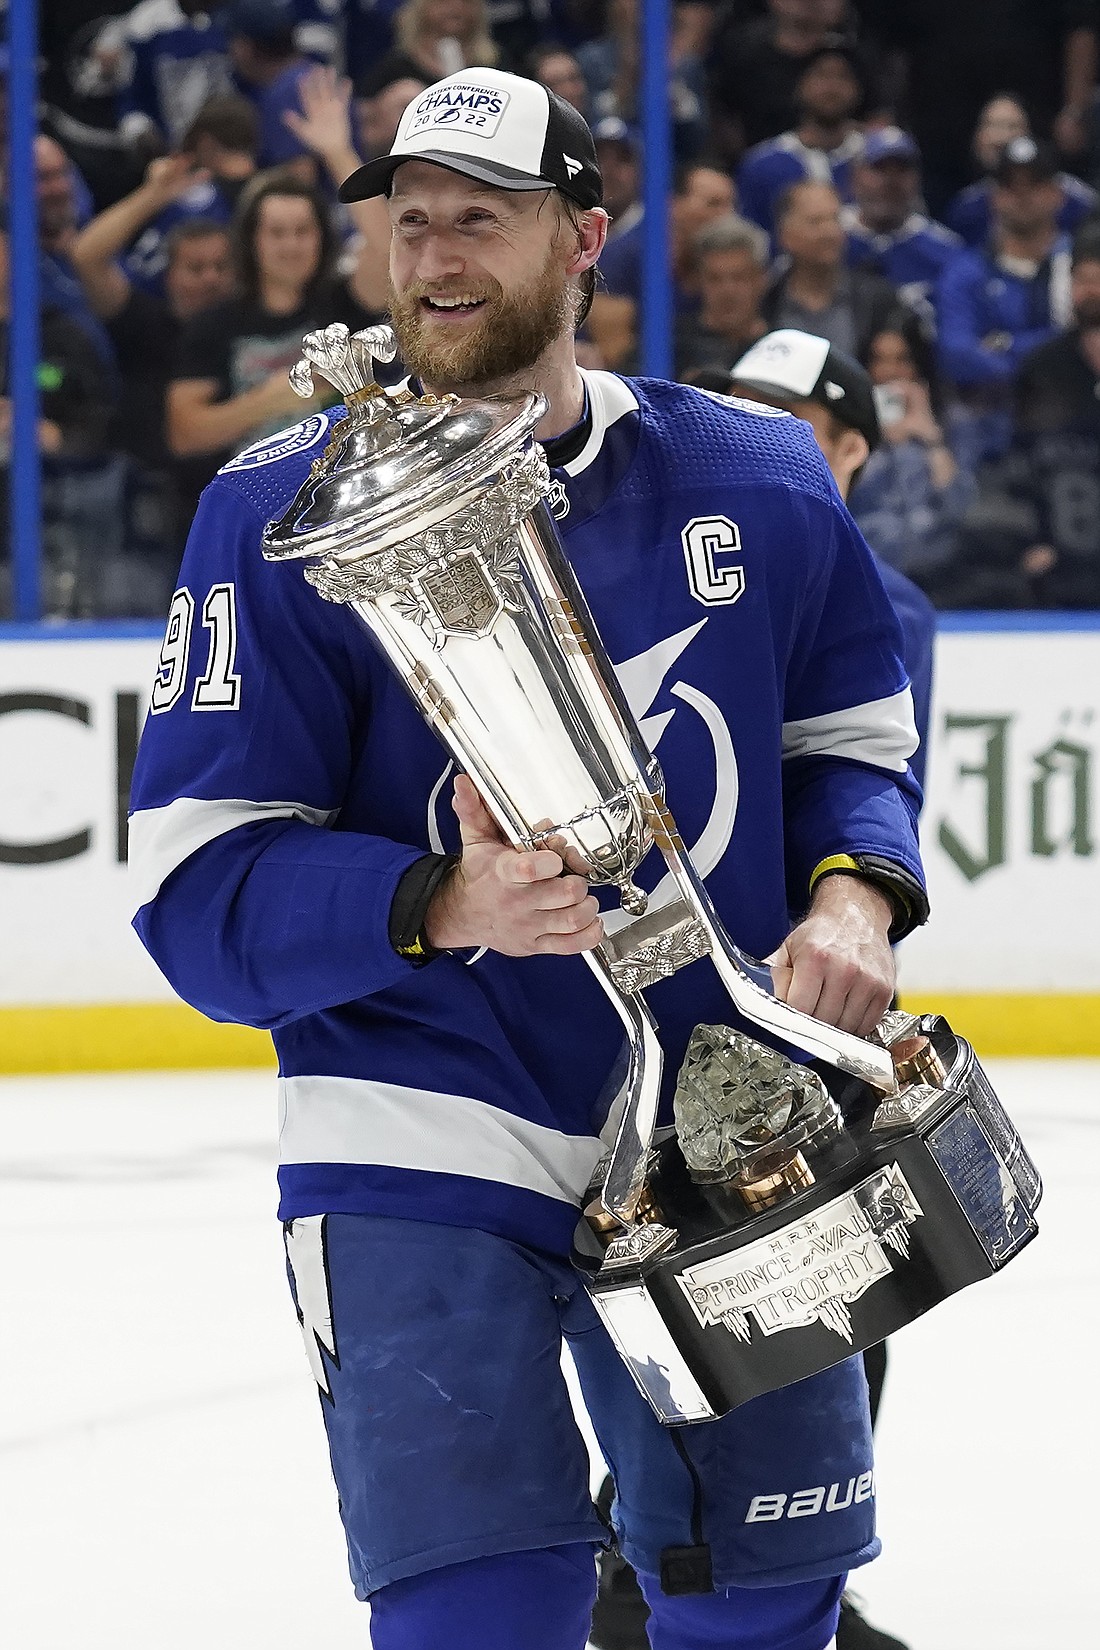 Tampa Bay Lightning center Steven Stamkos holds the Prince of Wales Trophy after defeating the New York Rangers during Game 6 of the NHL hockey Stanley Cup playoffs Eastern Conference finals June 11 in Tampa, Fla. The Lightning advanced to the Stanley Cup Finals.